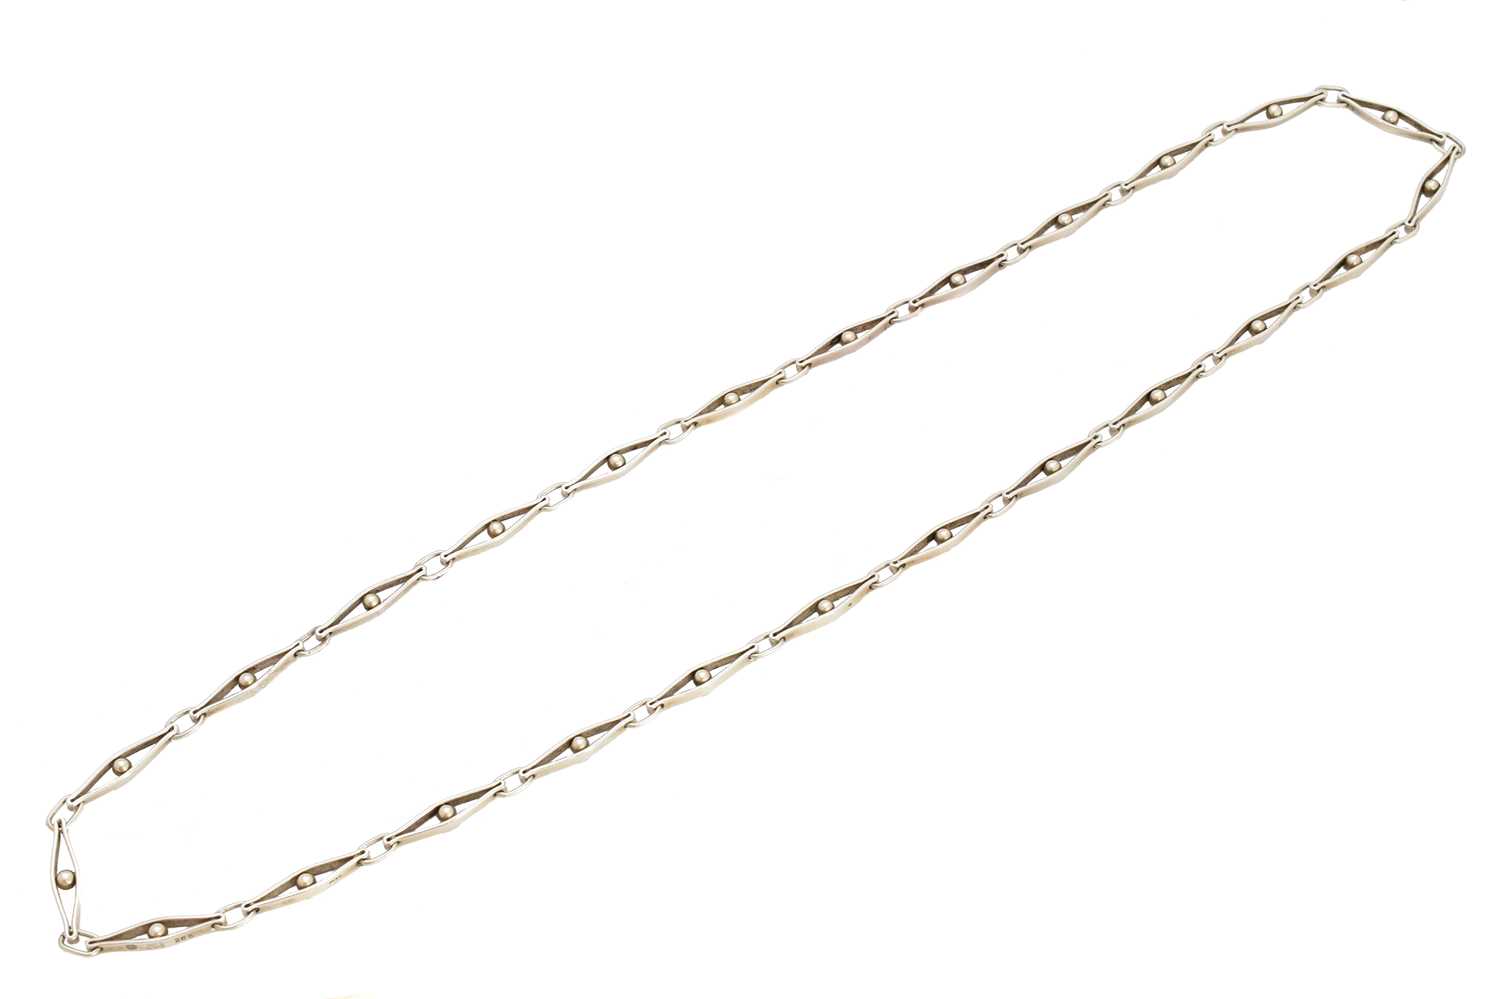 A silver Georg Jensen necklace, no. 285, the fancy link chain with polished spherical accents and trace link spacers, maker's marks for Georg Jensen, stamped 285, 925S, import marks for London, 1976, length 72cm, gross weight 42.2g, with maker's box.